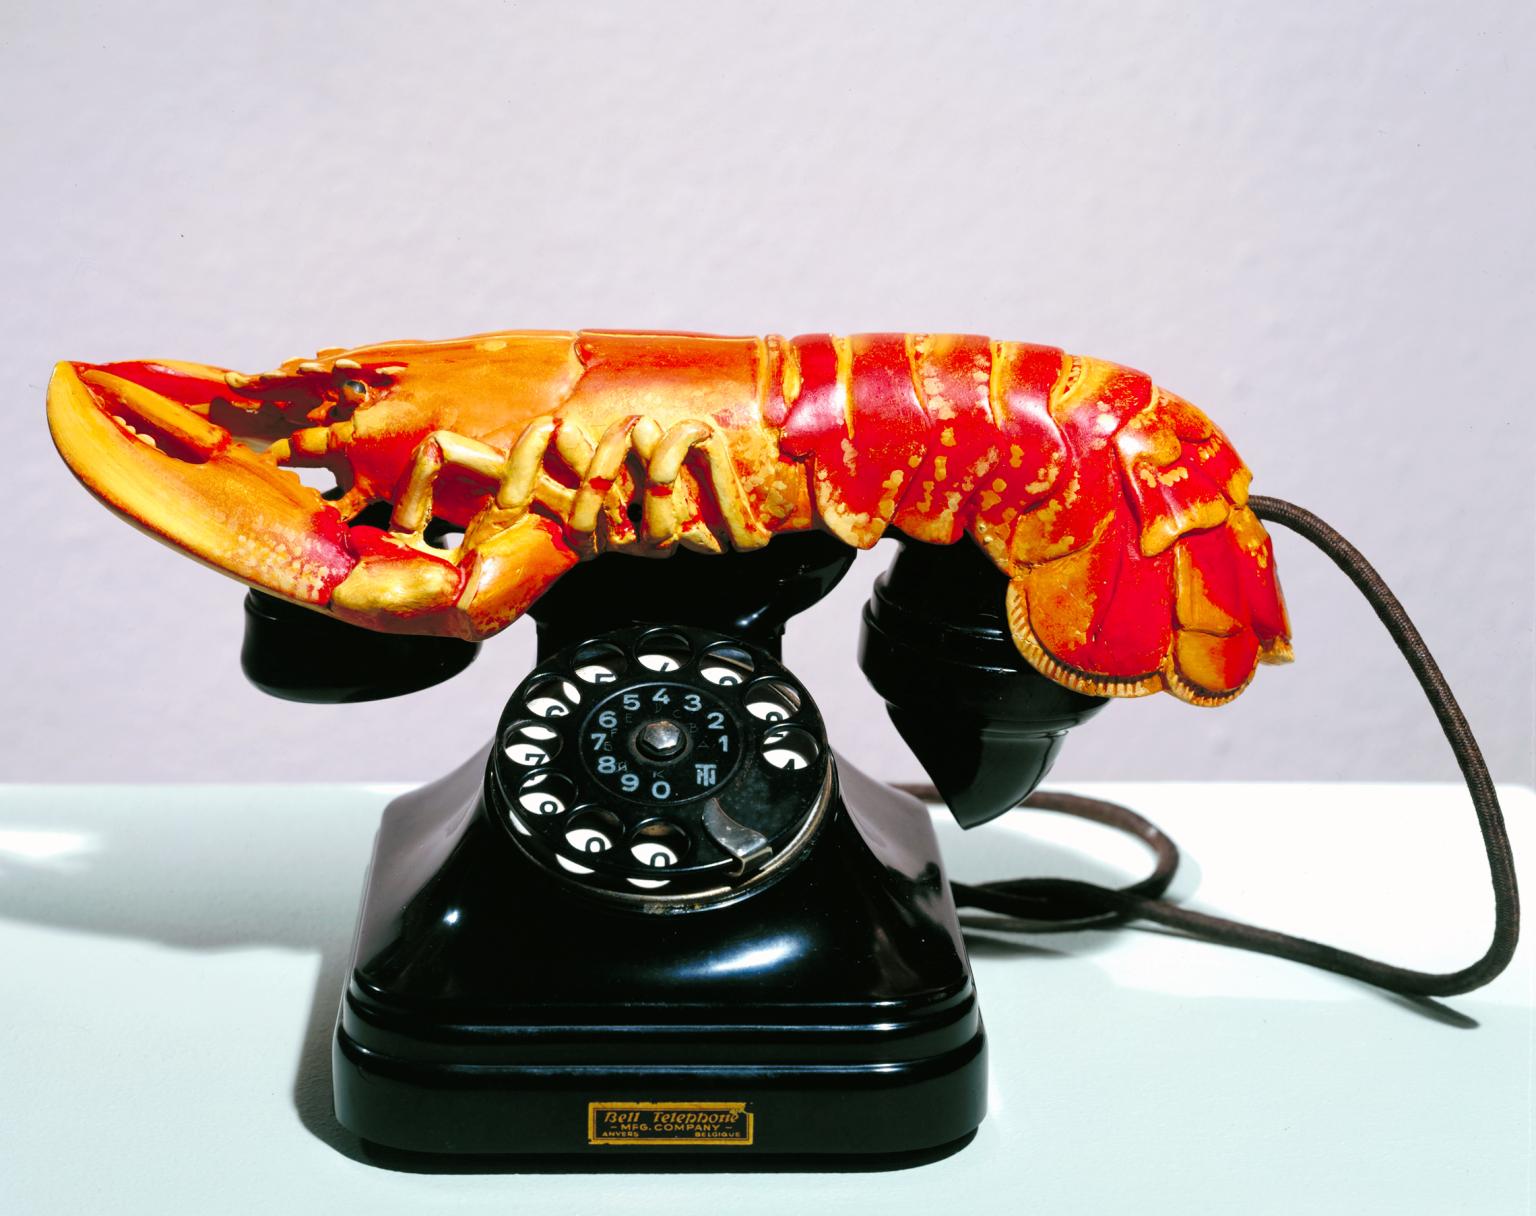 Lobster Telephone 1936 Salvador Dal? 1904-1989 Purchased 1981 http://www.tate.org.uk/art/work/T03257